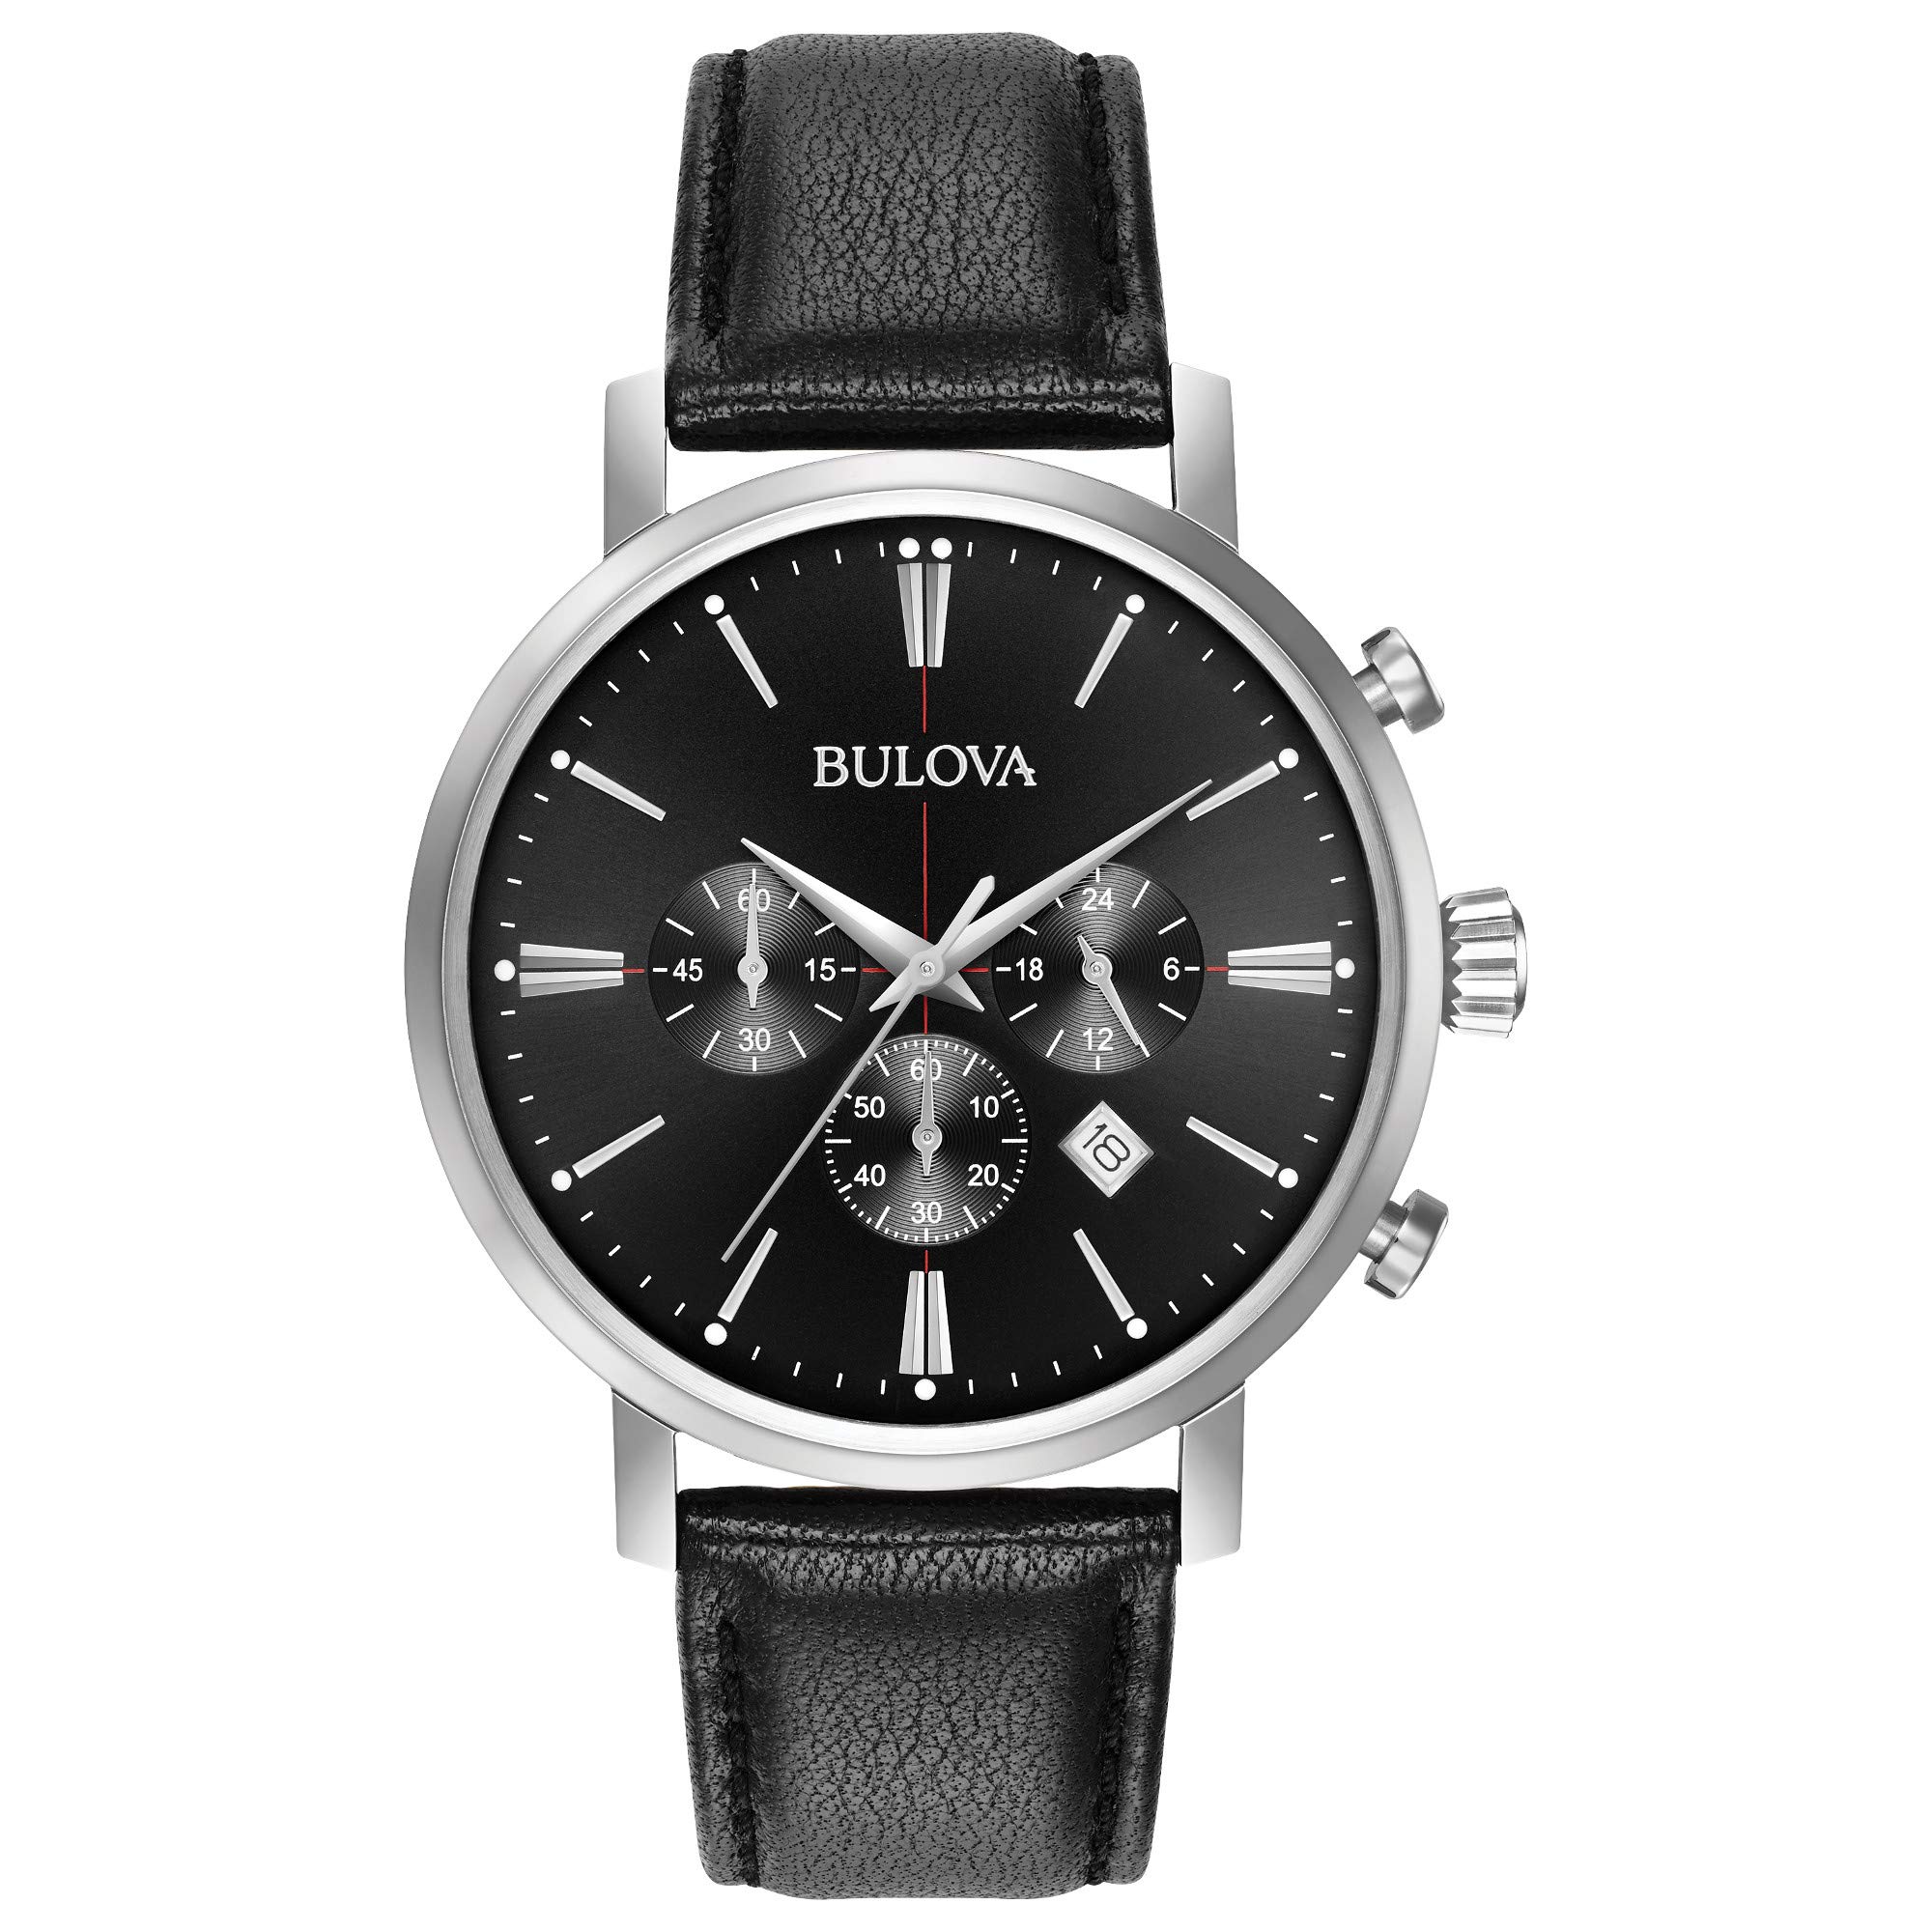 Bulova Men's Classic Aerojet Stainless Steel 6-Hand Chronograph Watch with Black Leather Strap, 41mm Style: 96B262